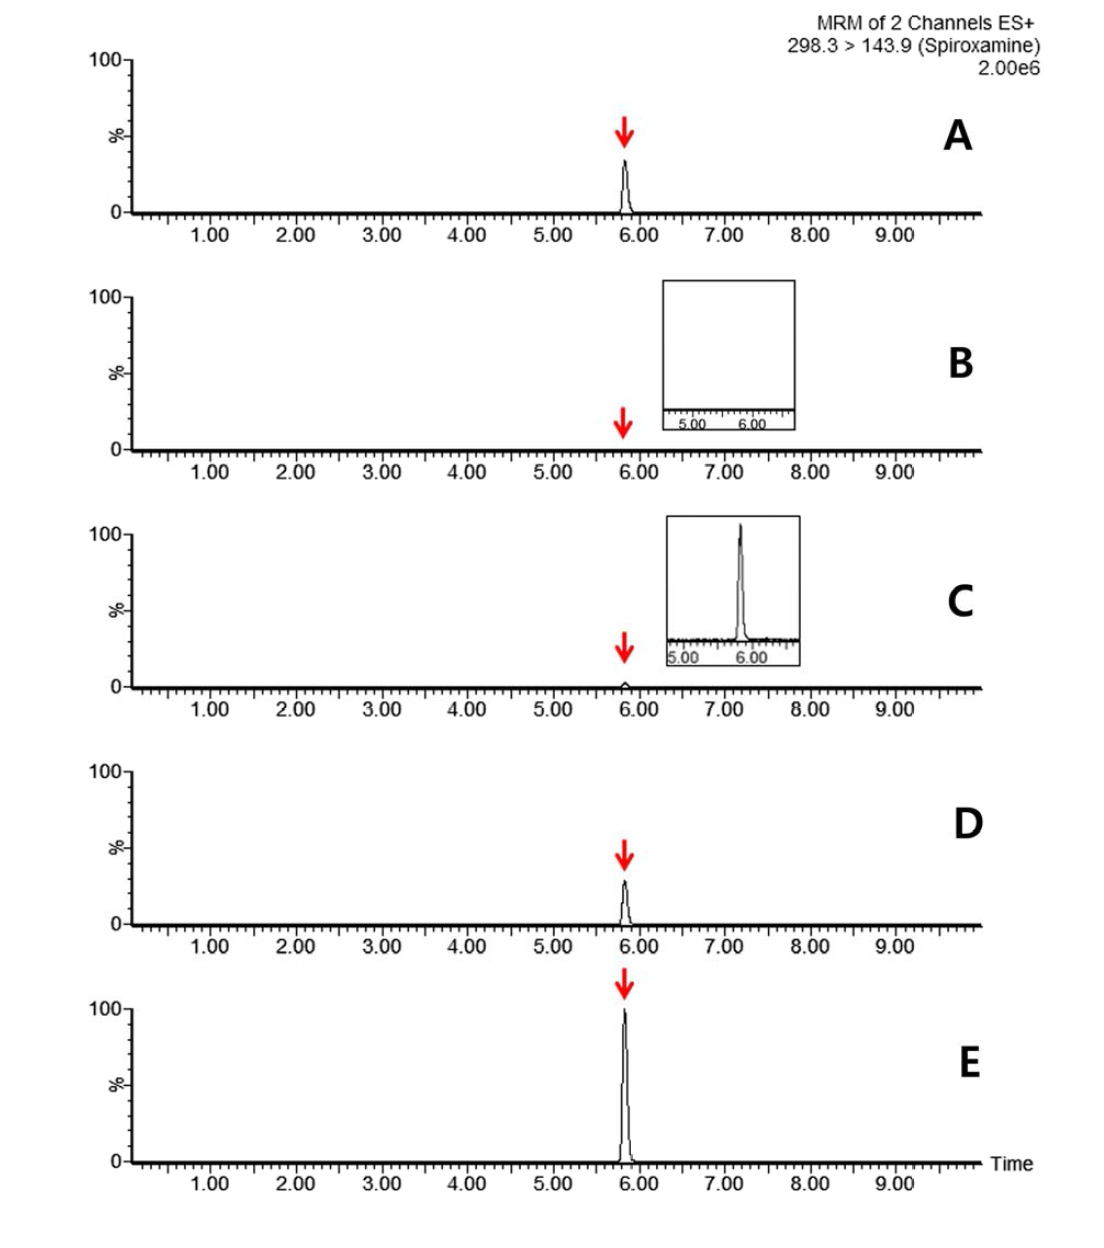 Representative MRM(quantification ion) chromatograms of spiroxamine corresponding to: (A) standard solution at 0.01 mg/kg, (B) soybean control, (C) spiked at 0.001 mg/kg, (D) spiked at 0.01 mg/kg and (E) spiked at 0.05 mg/kg